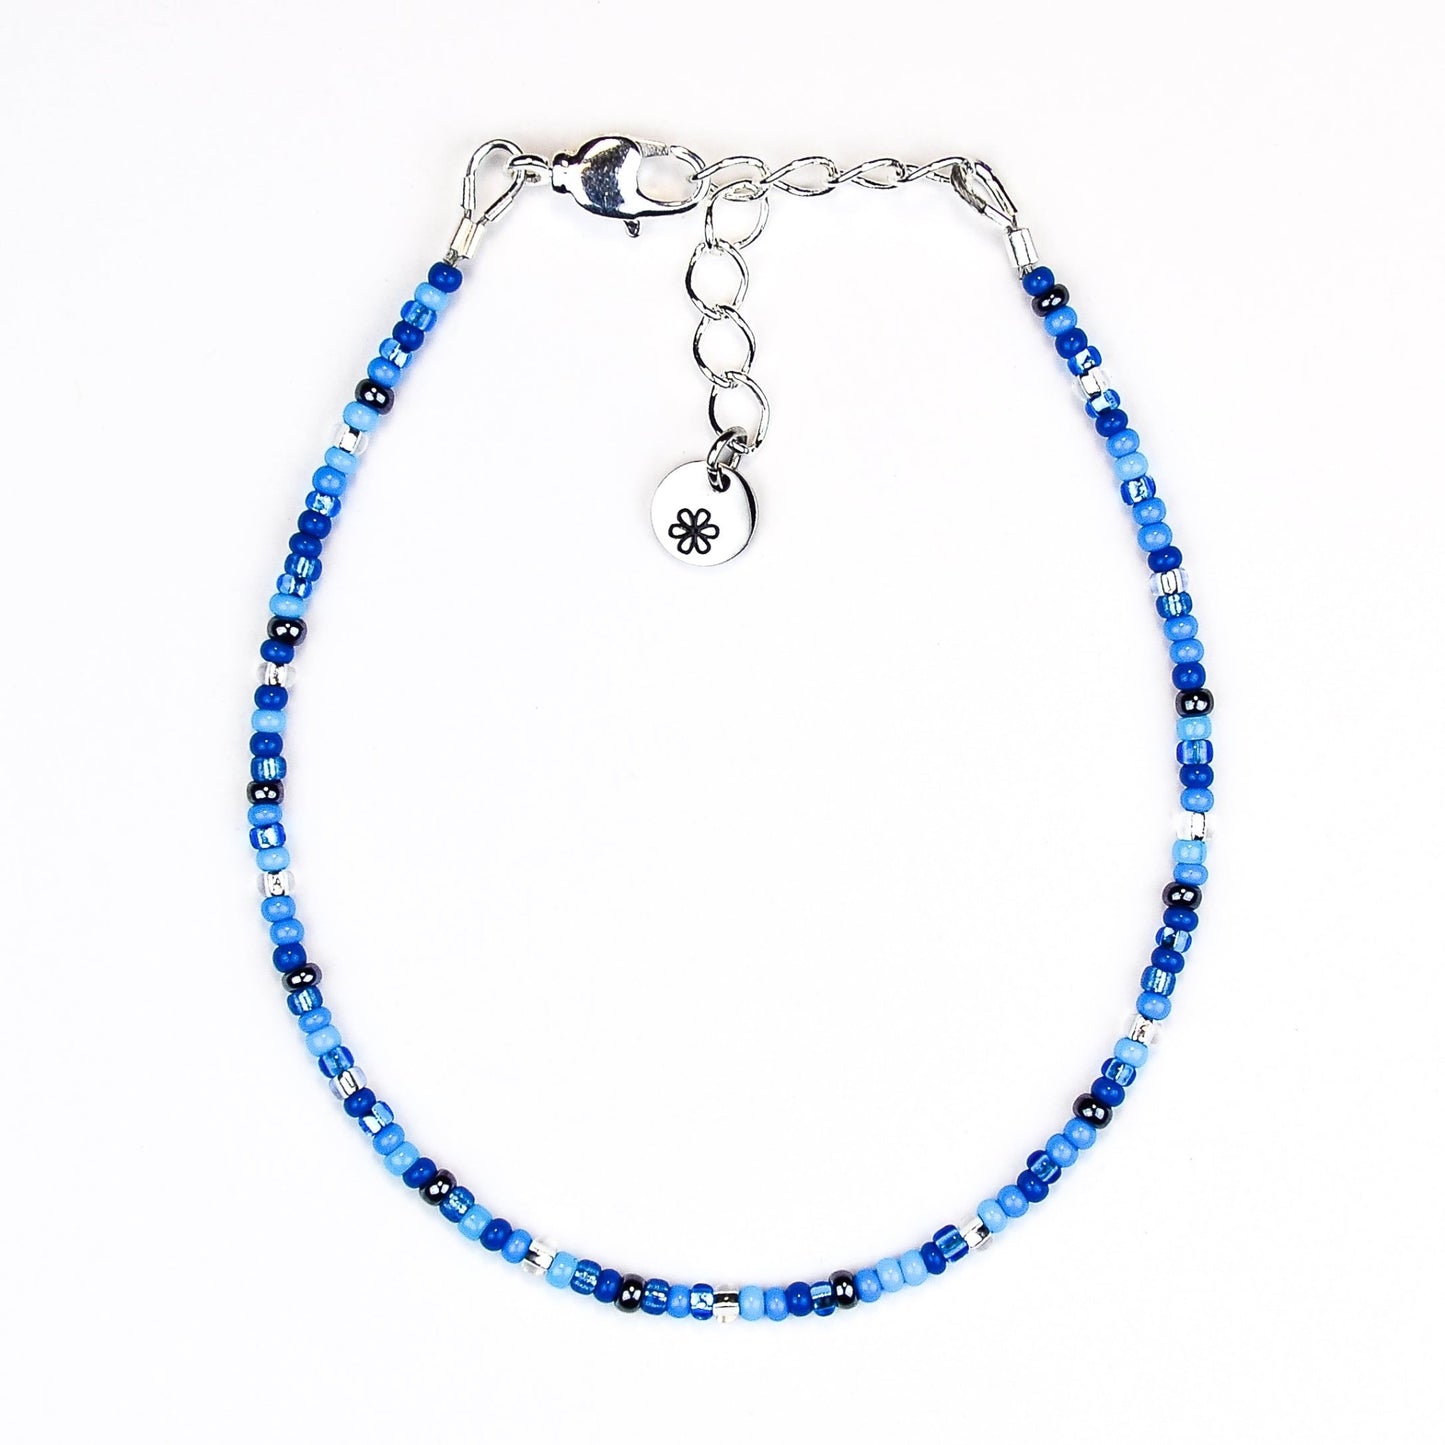 Dainty bracelet - blue and silver glass beads - creations by cherie